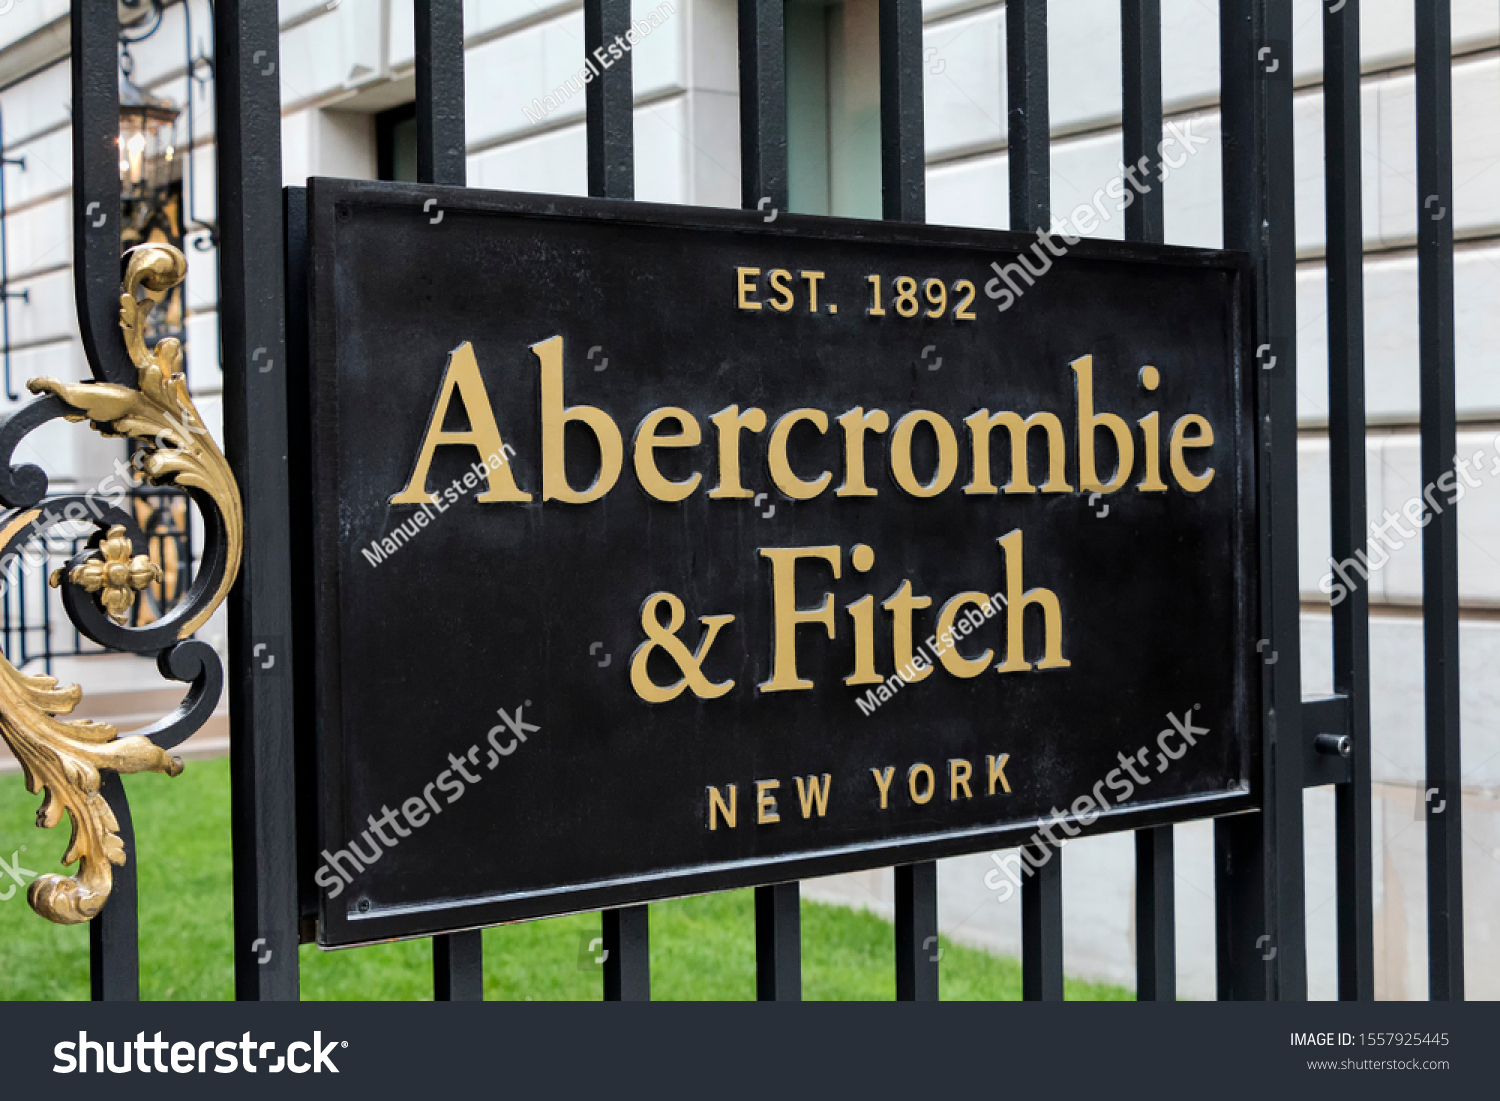 abercrombie and fitch lifestyle